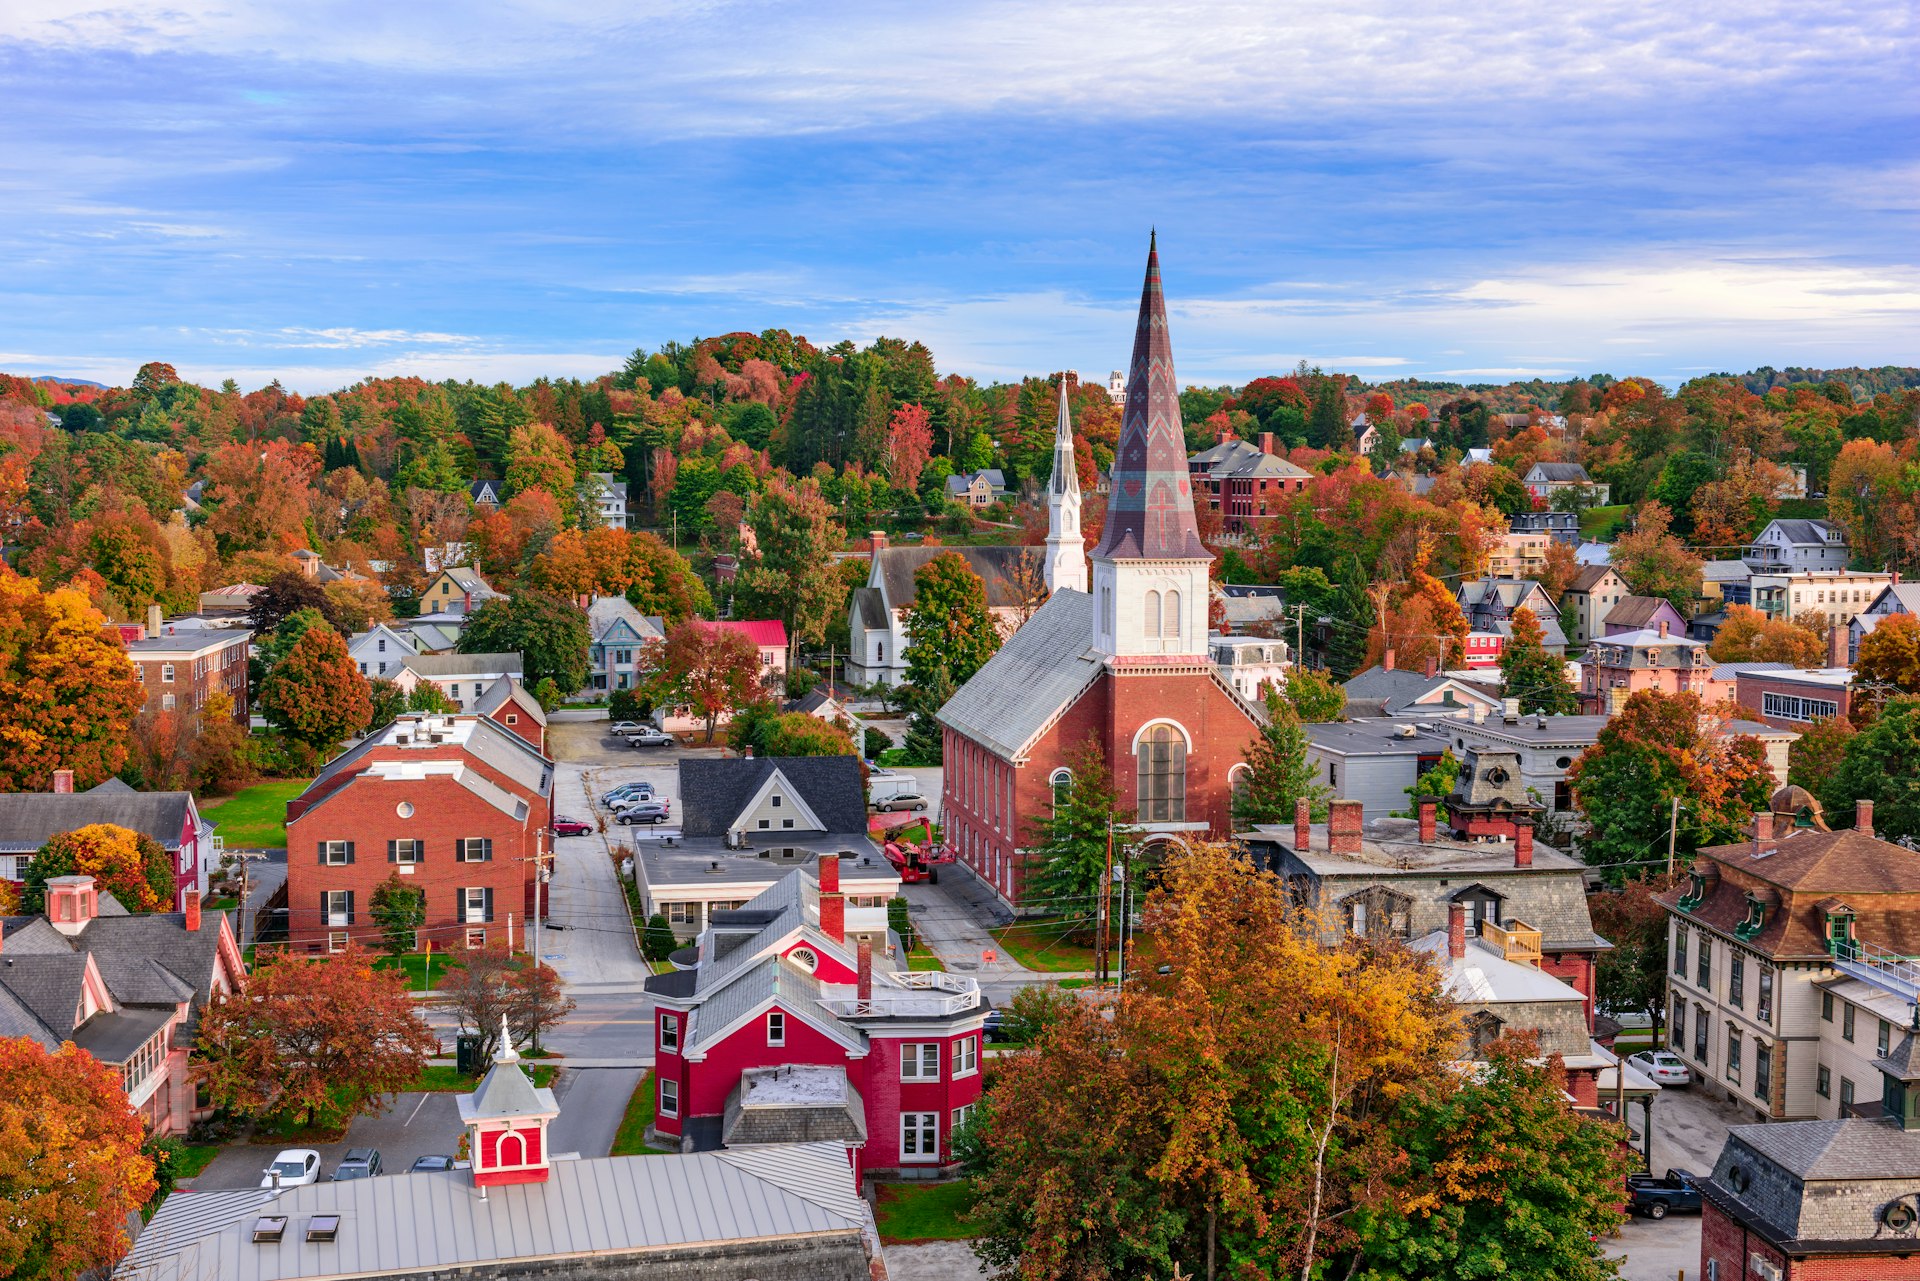 The skyline of Montpelier in Vermont, USA